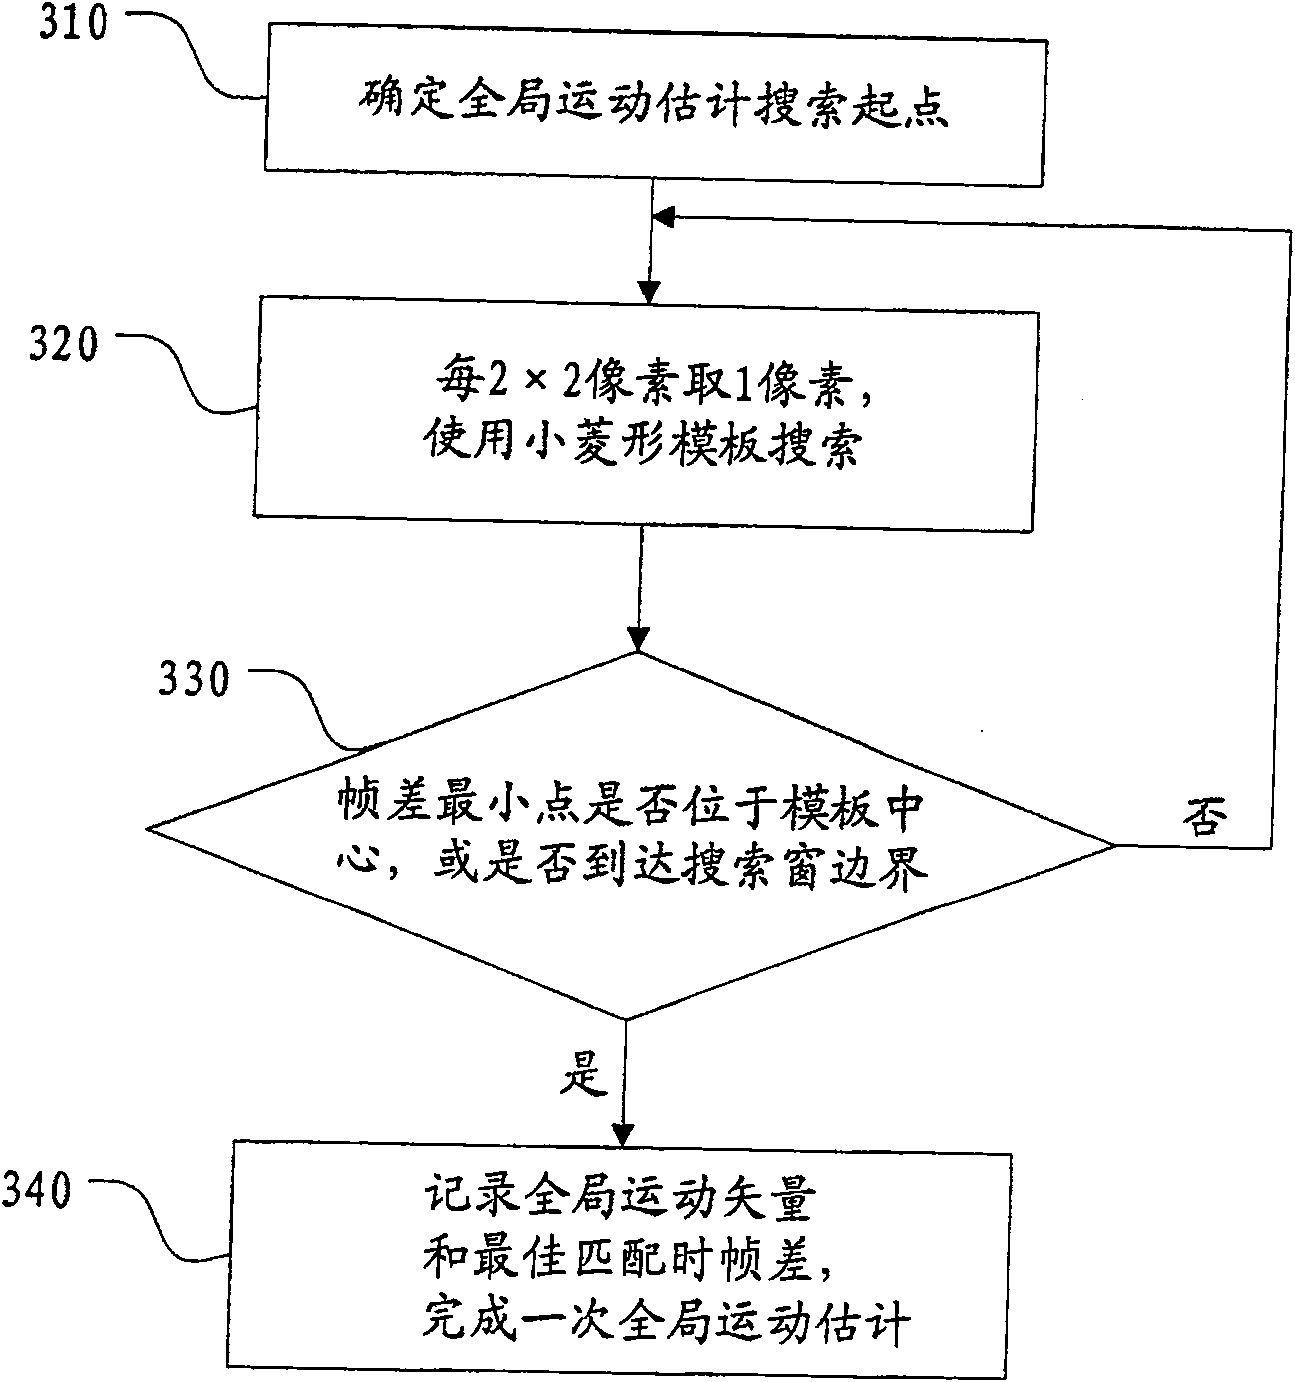 Method for rapidly predicting frame space of aerophotographic traffic video